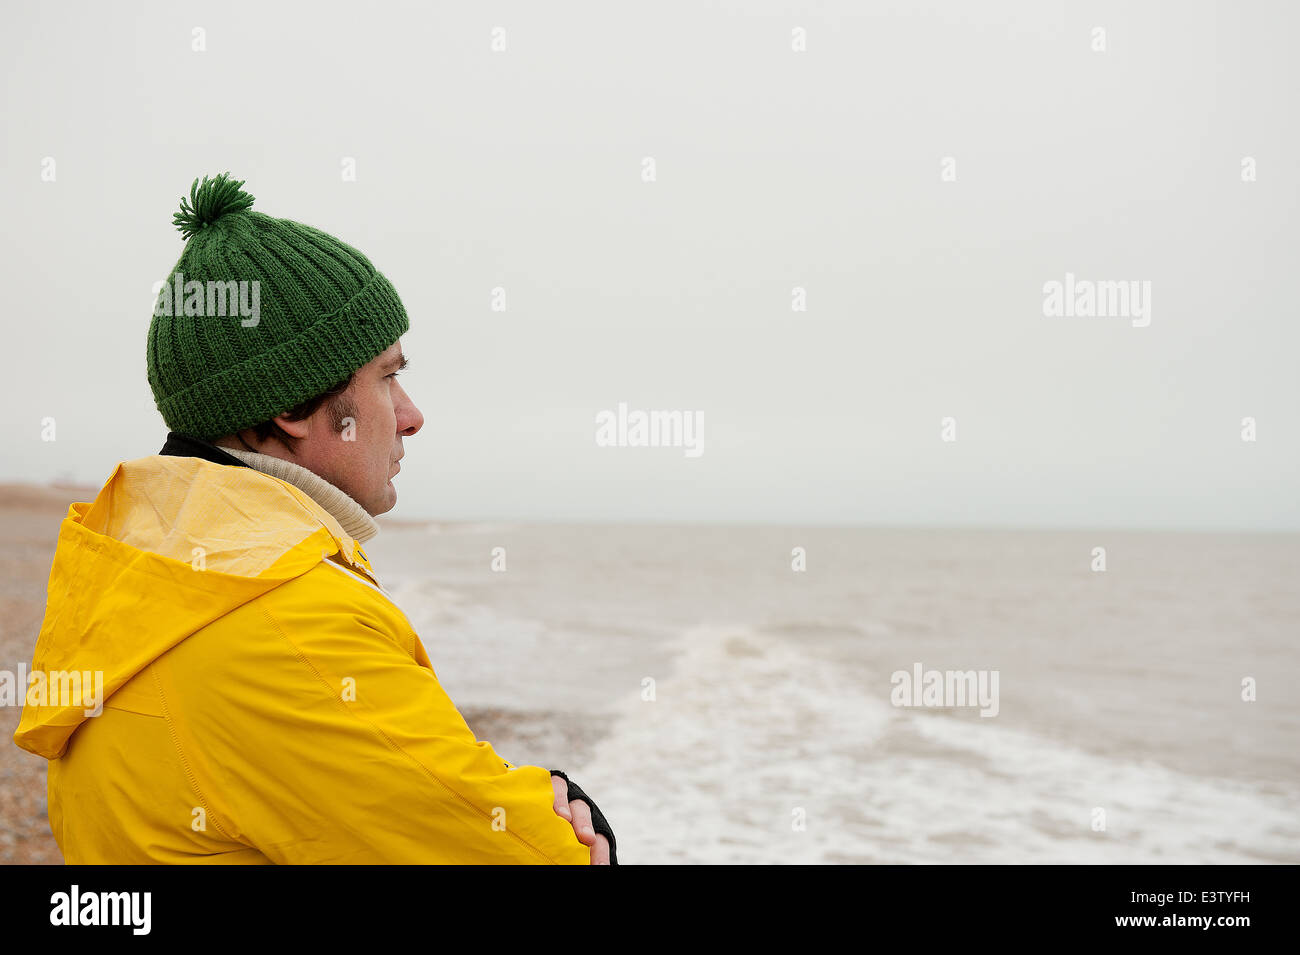 Sea fisherman wearing bright yellow water proof overalls, keeping a watchful eye across the sea. Stock Photo